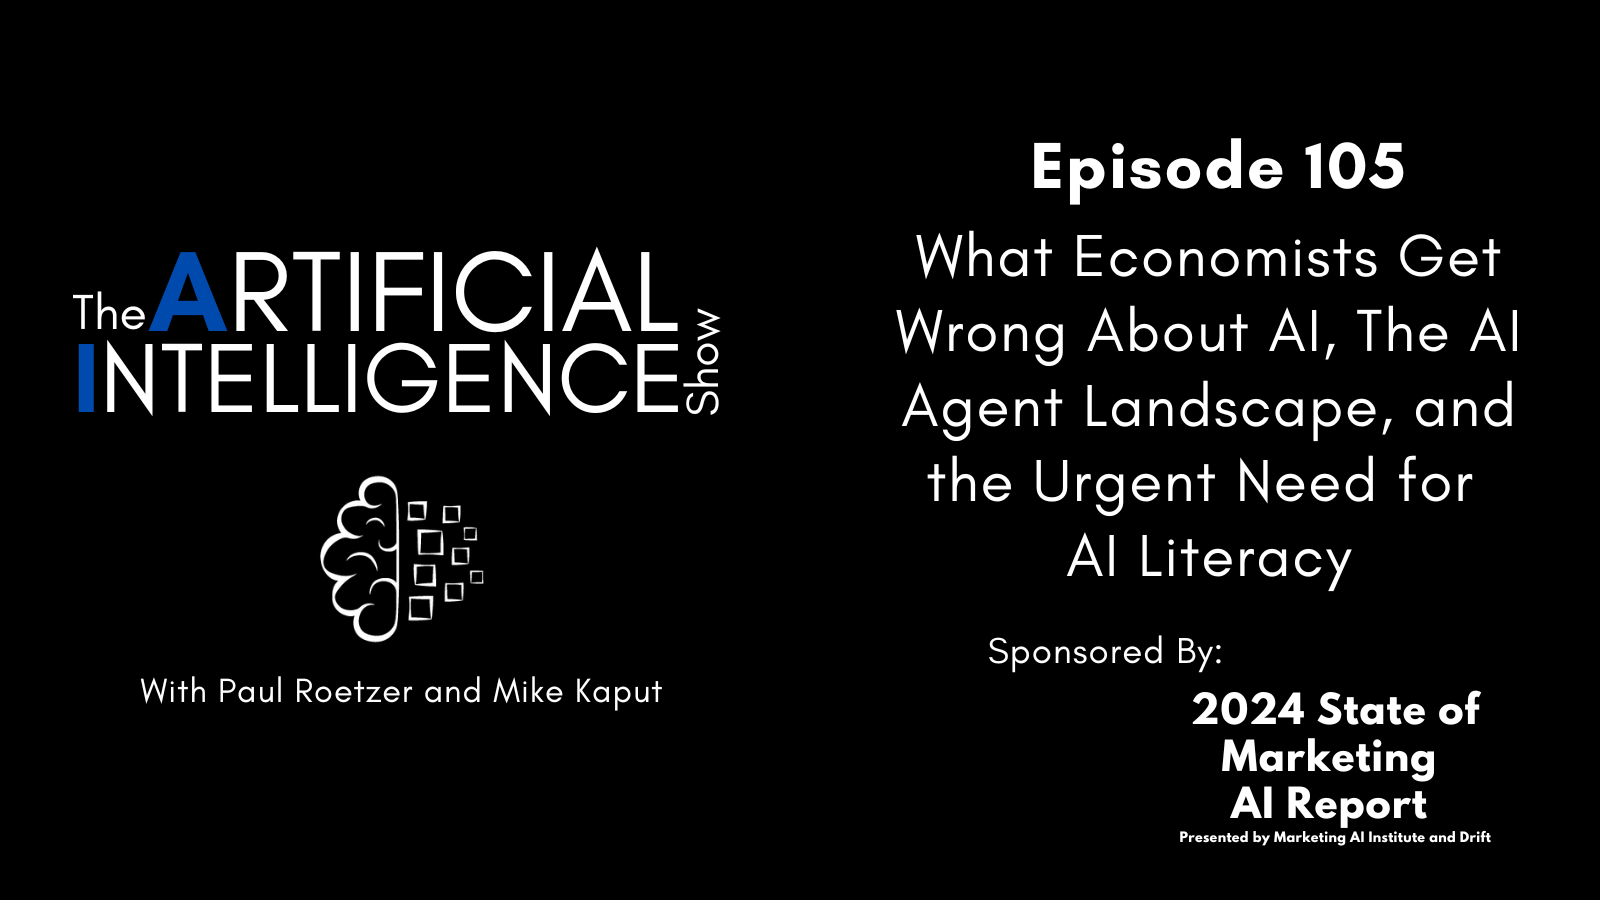 [The AI Show Episode 105]: What Economists Get Wrong About AI, The AI Agent Landscape, and the Urgent Need for AI Literacy [Video]